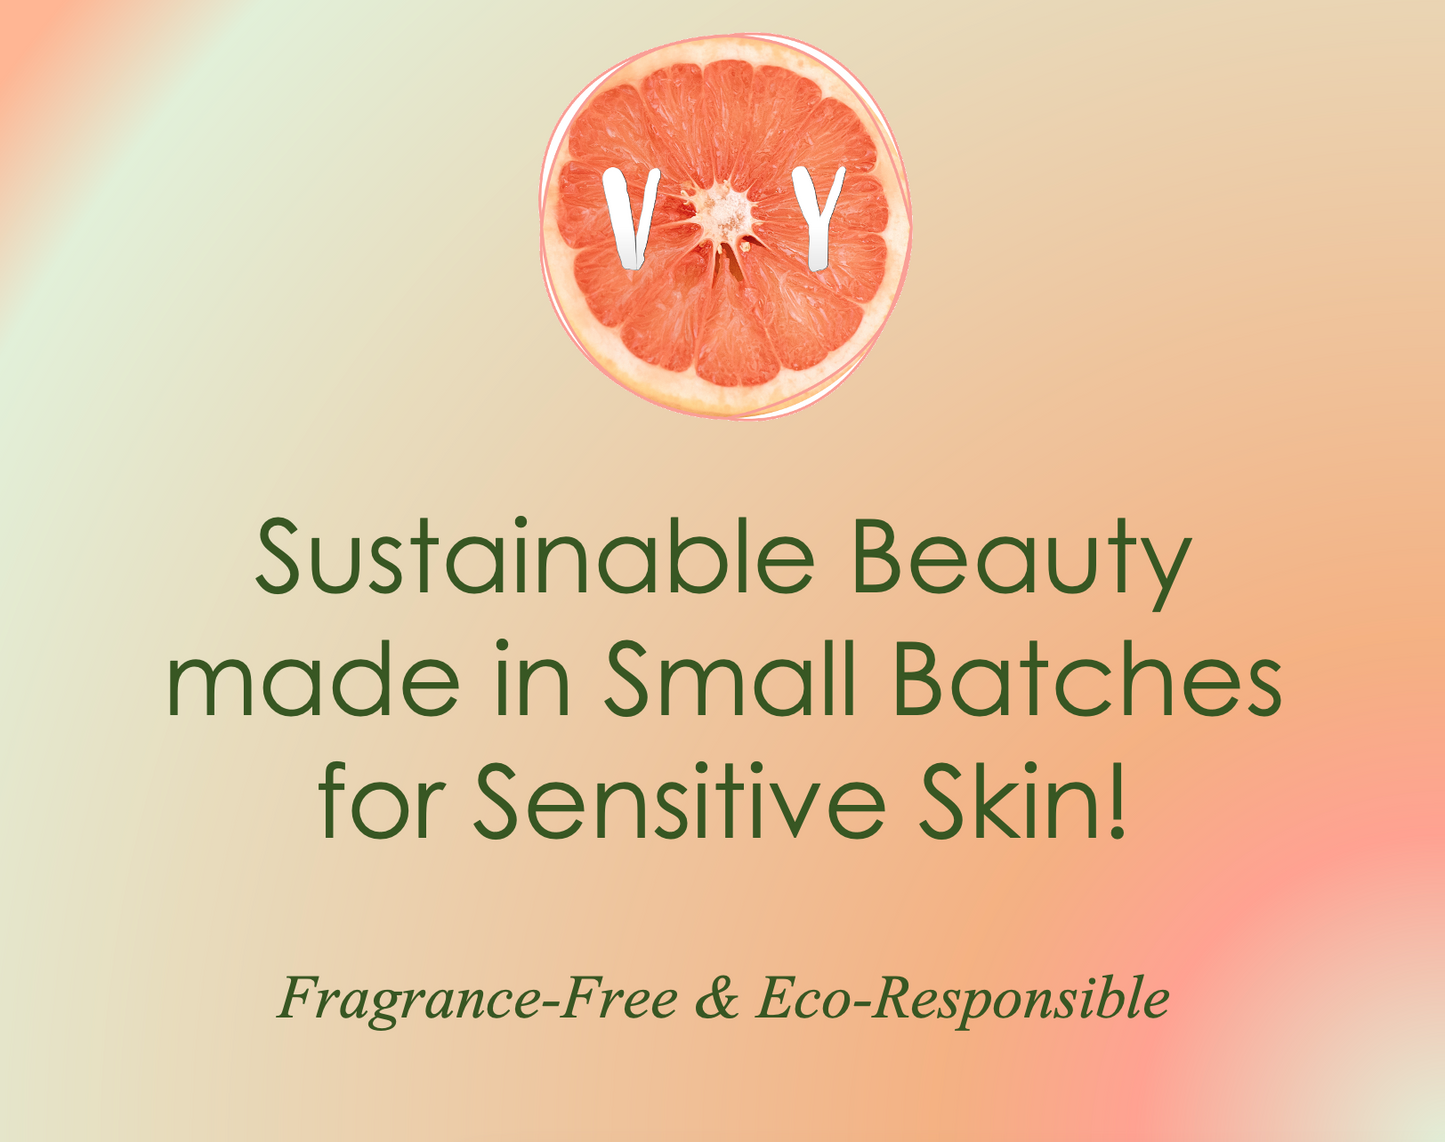 Sustainable beauty brand fragrance free for sensitive skin 